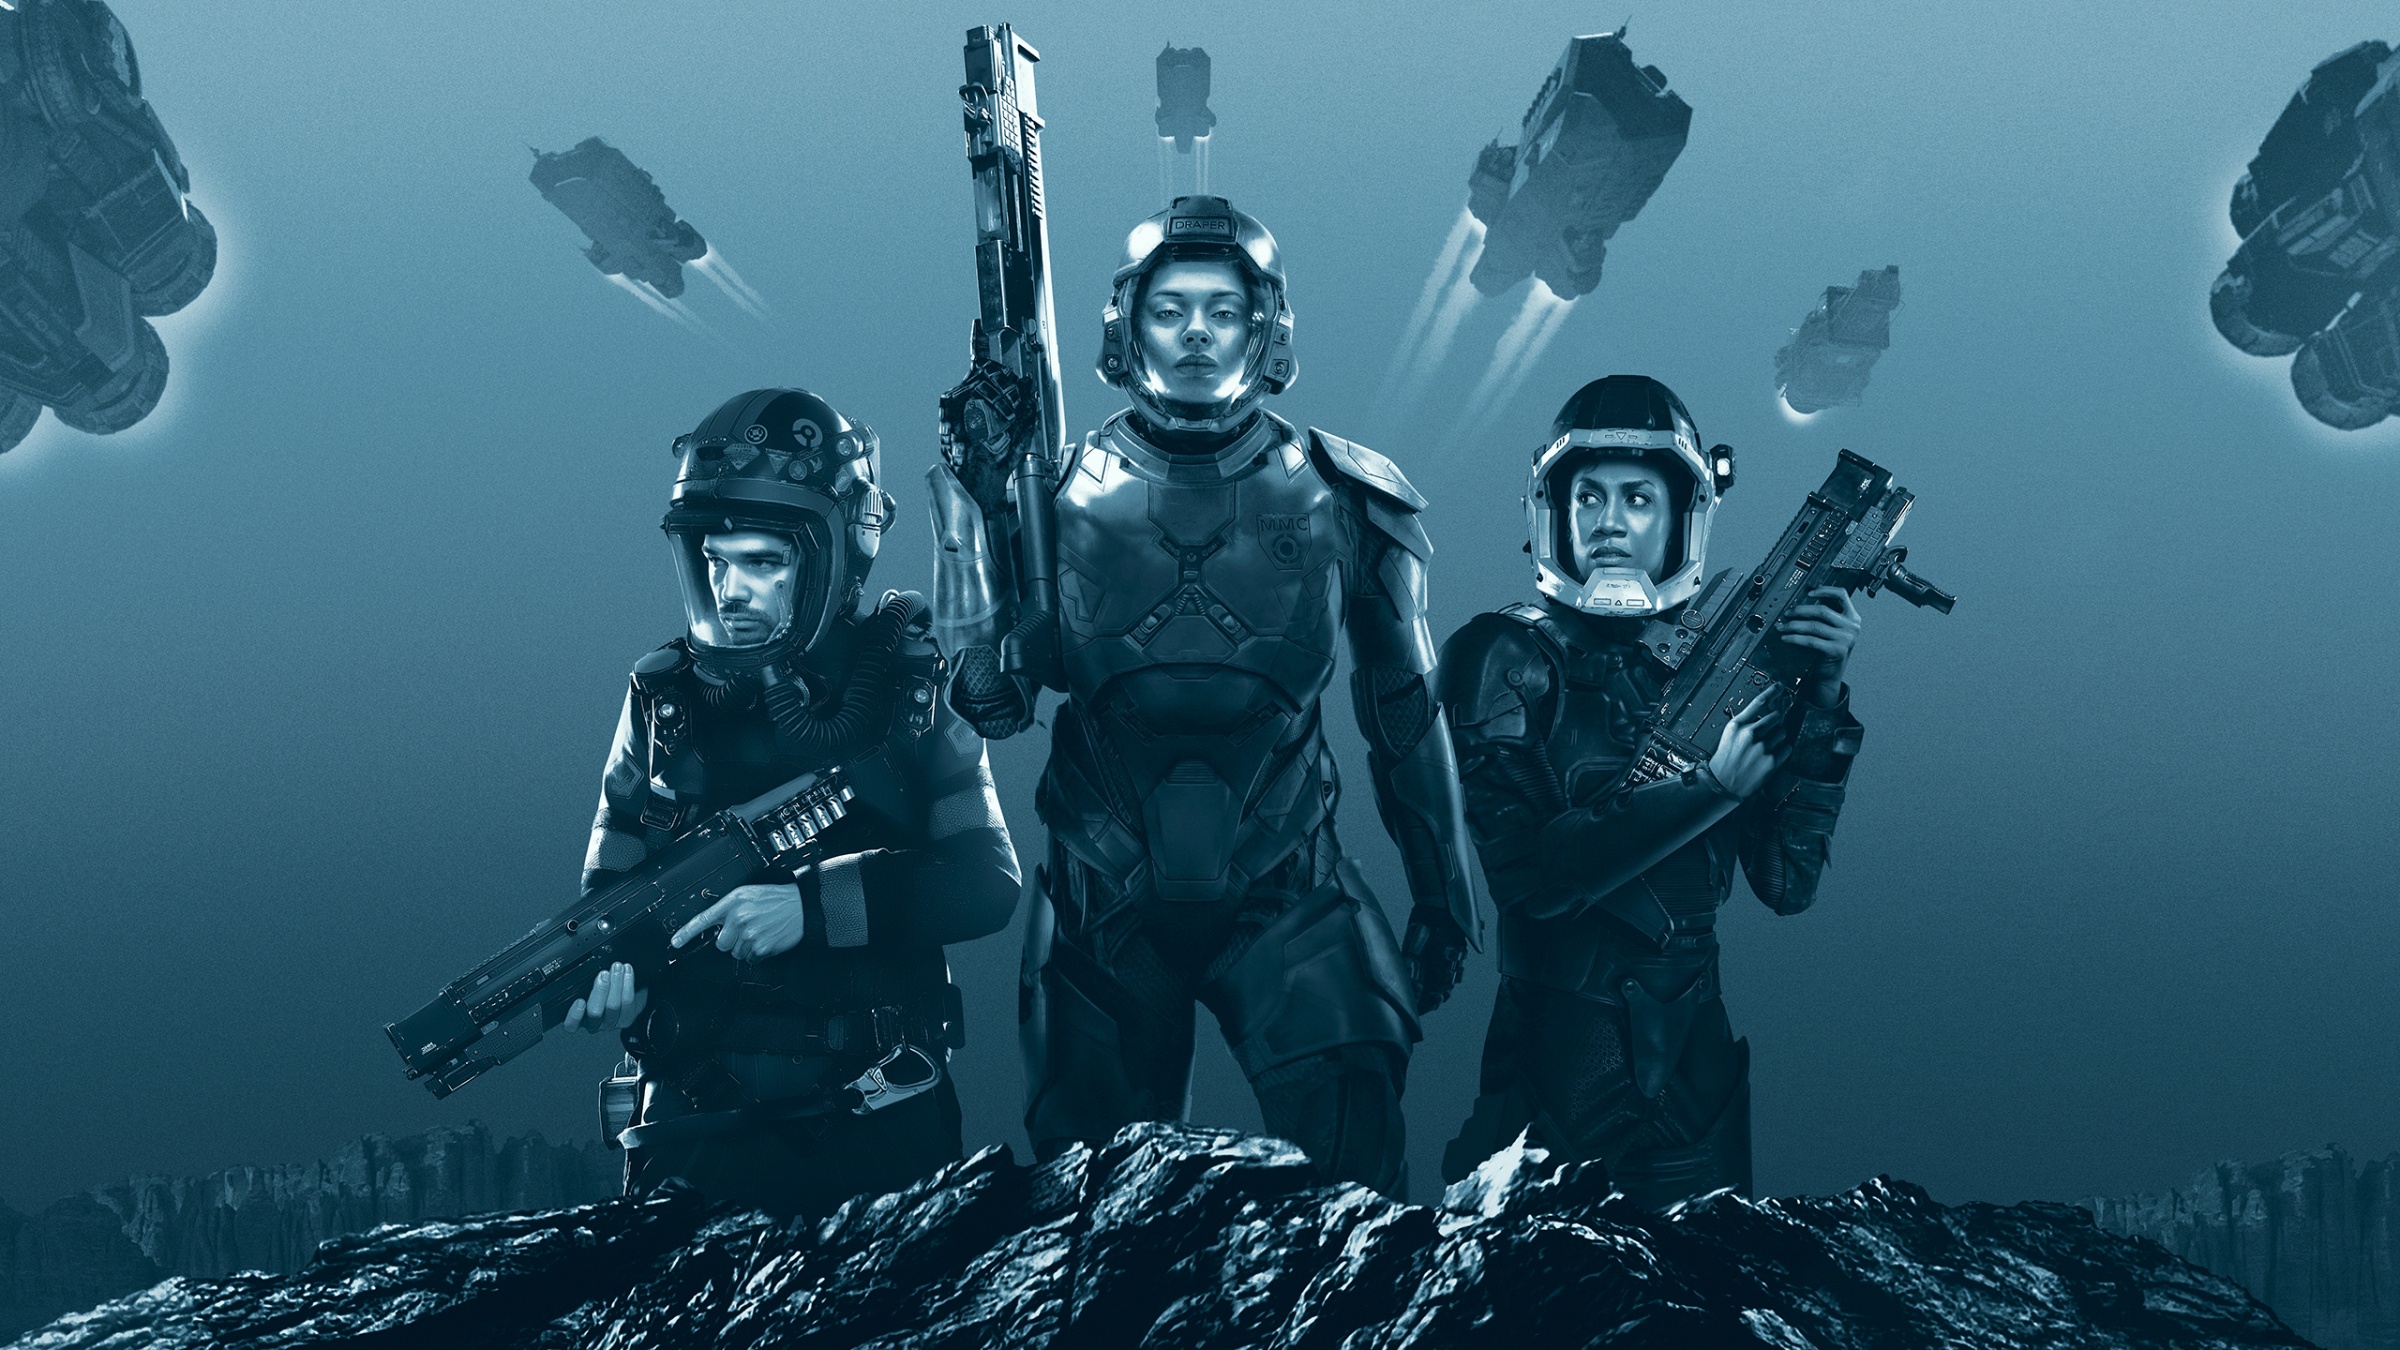 TV Show The Expanse HD Wallpaper | Background Image